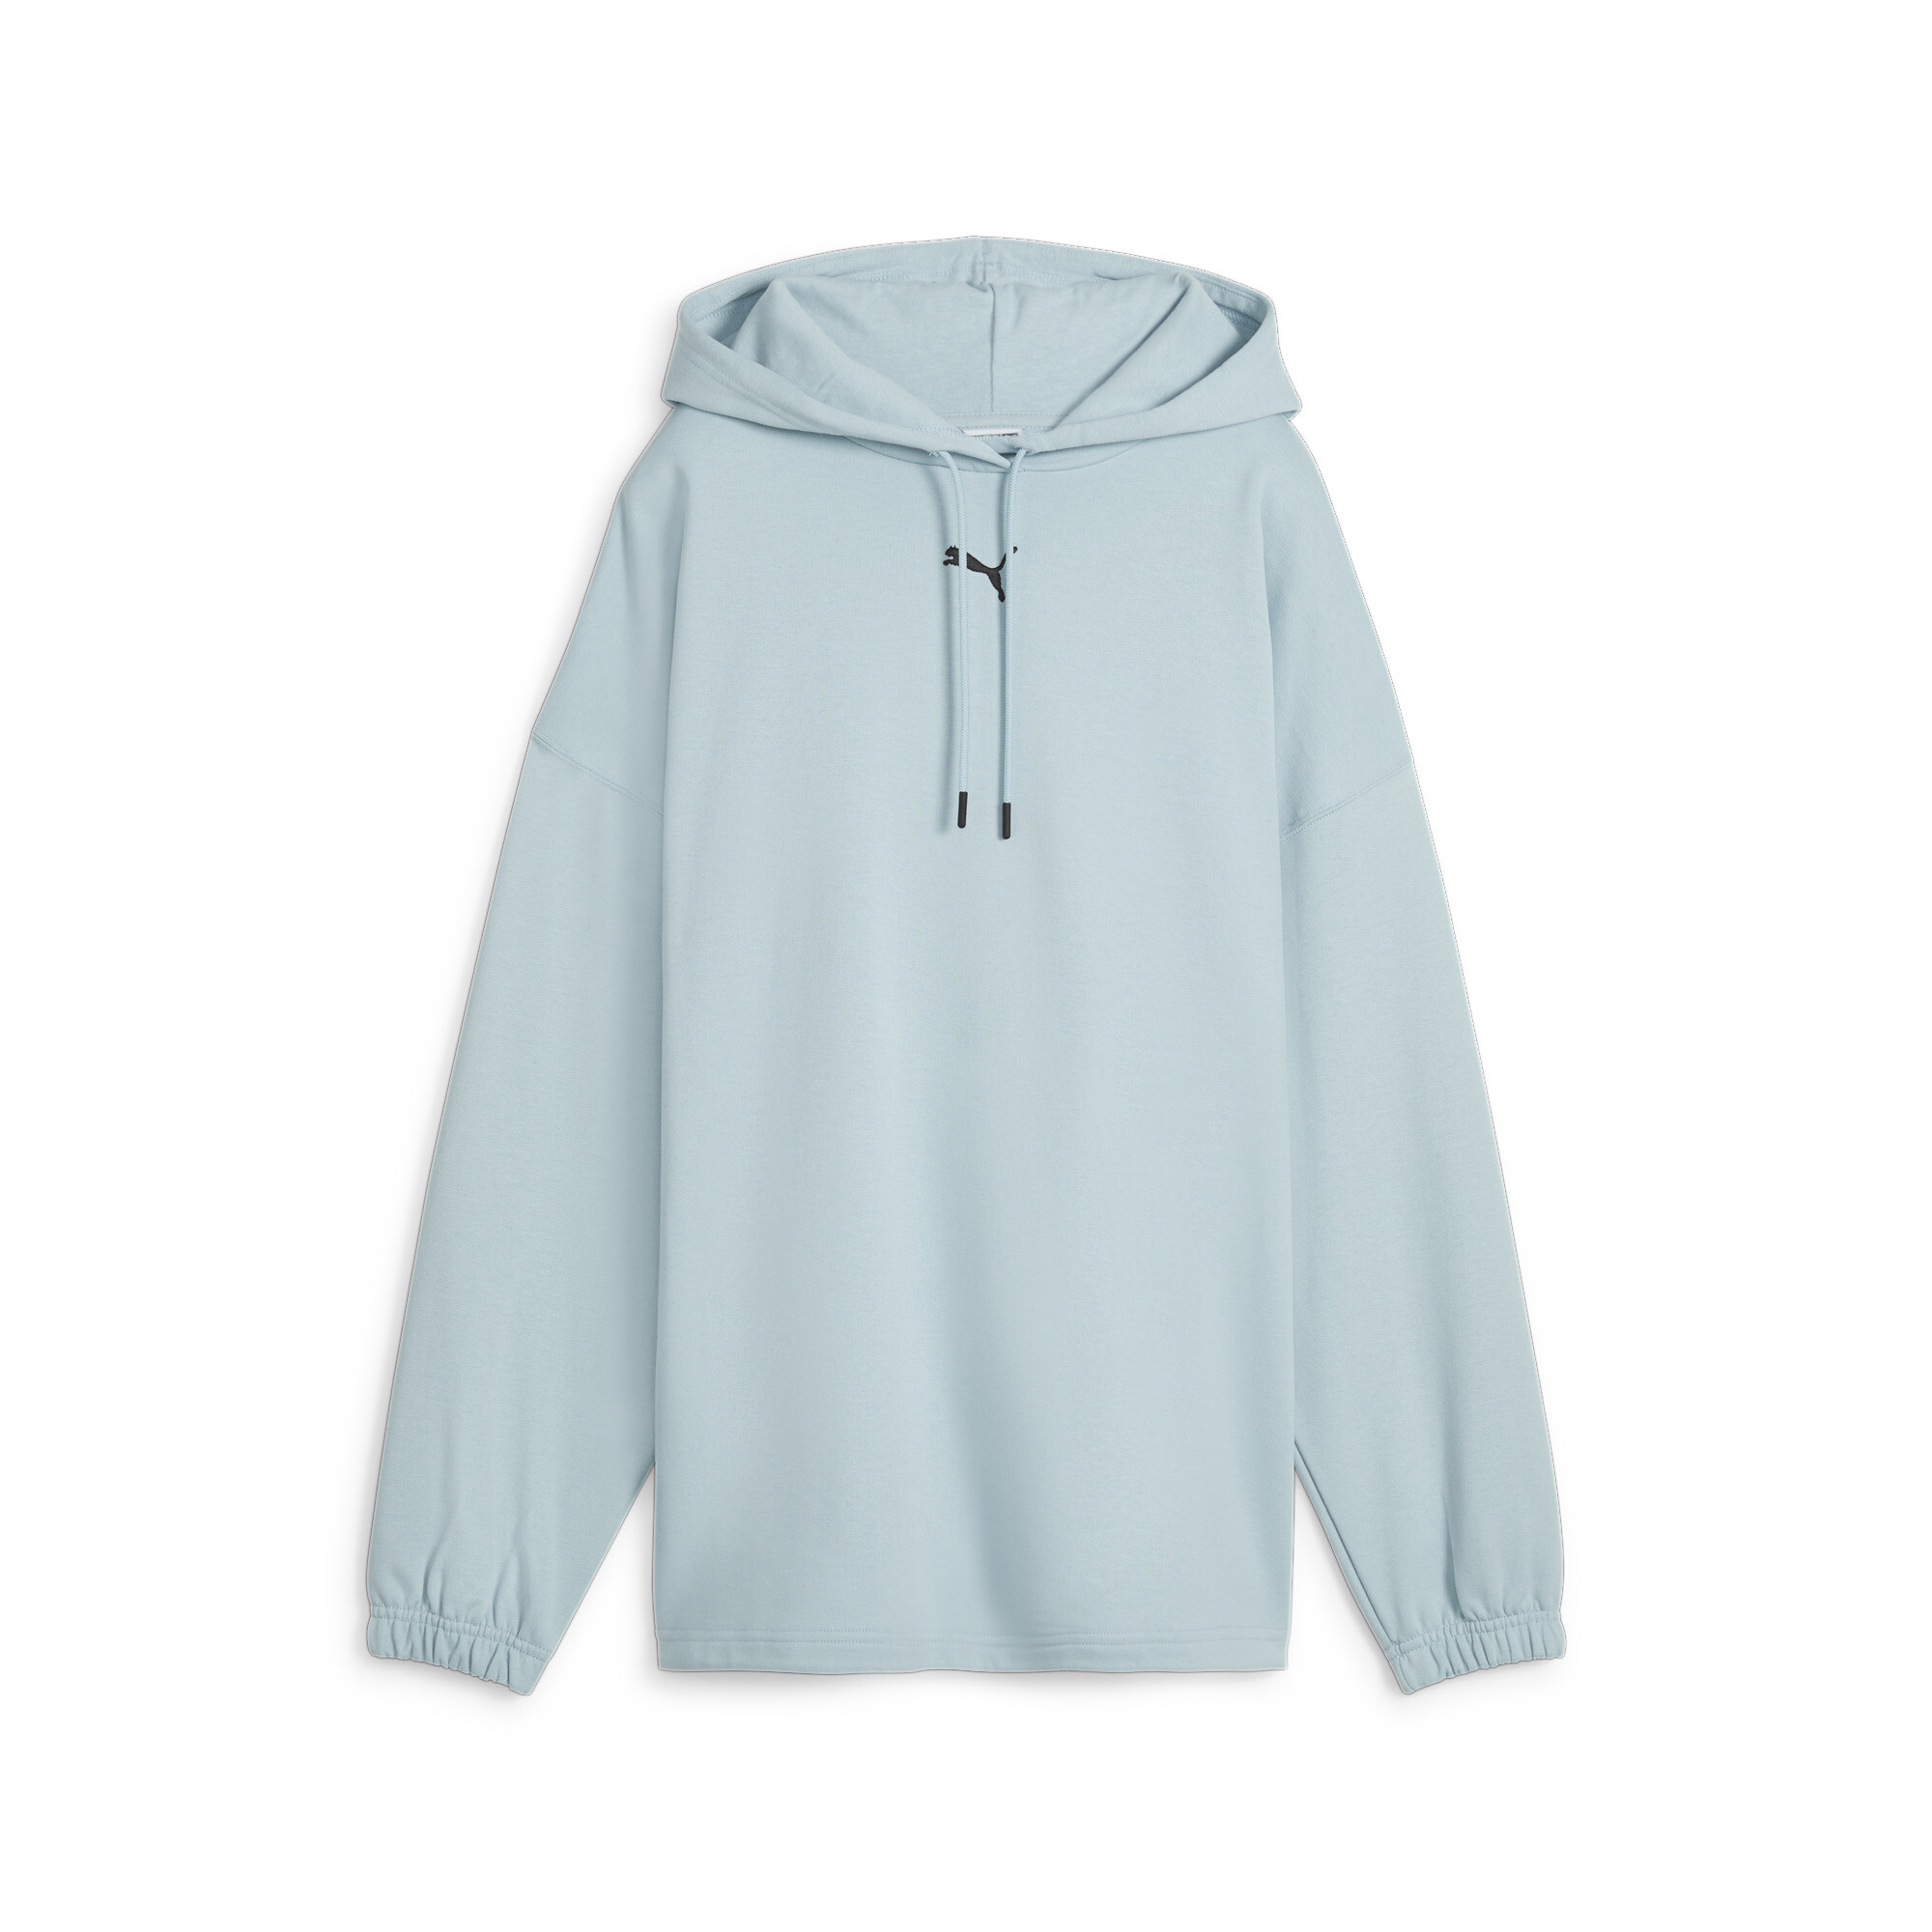 Women's PUMA DARE TO Oversized Hoodie In Blue, Size XS